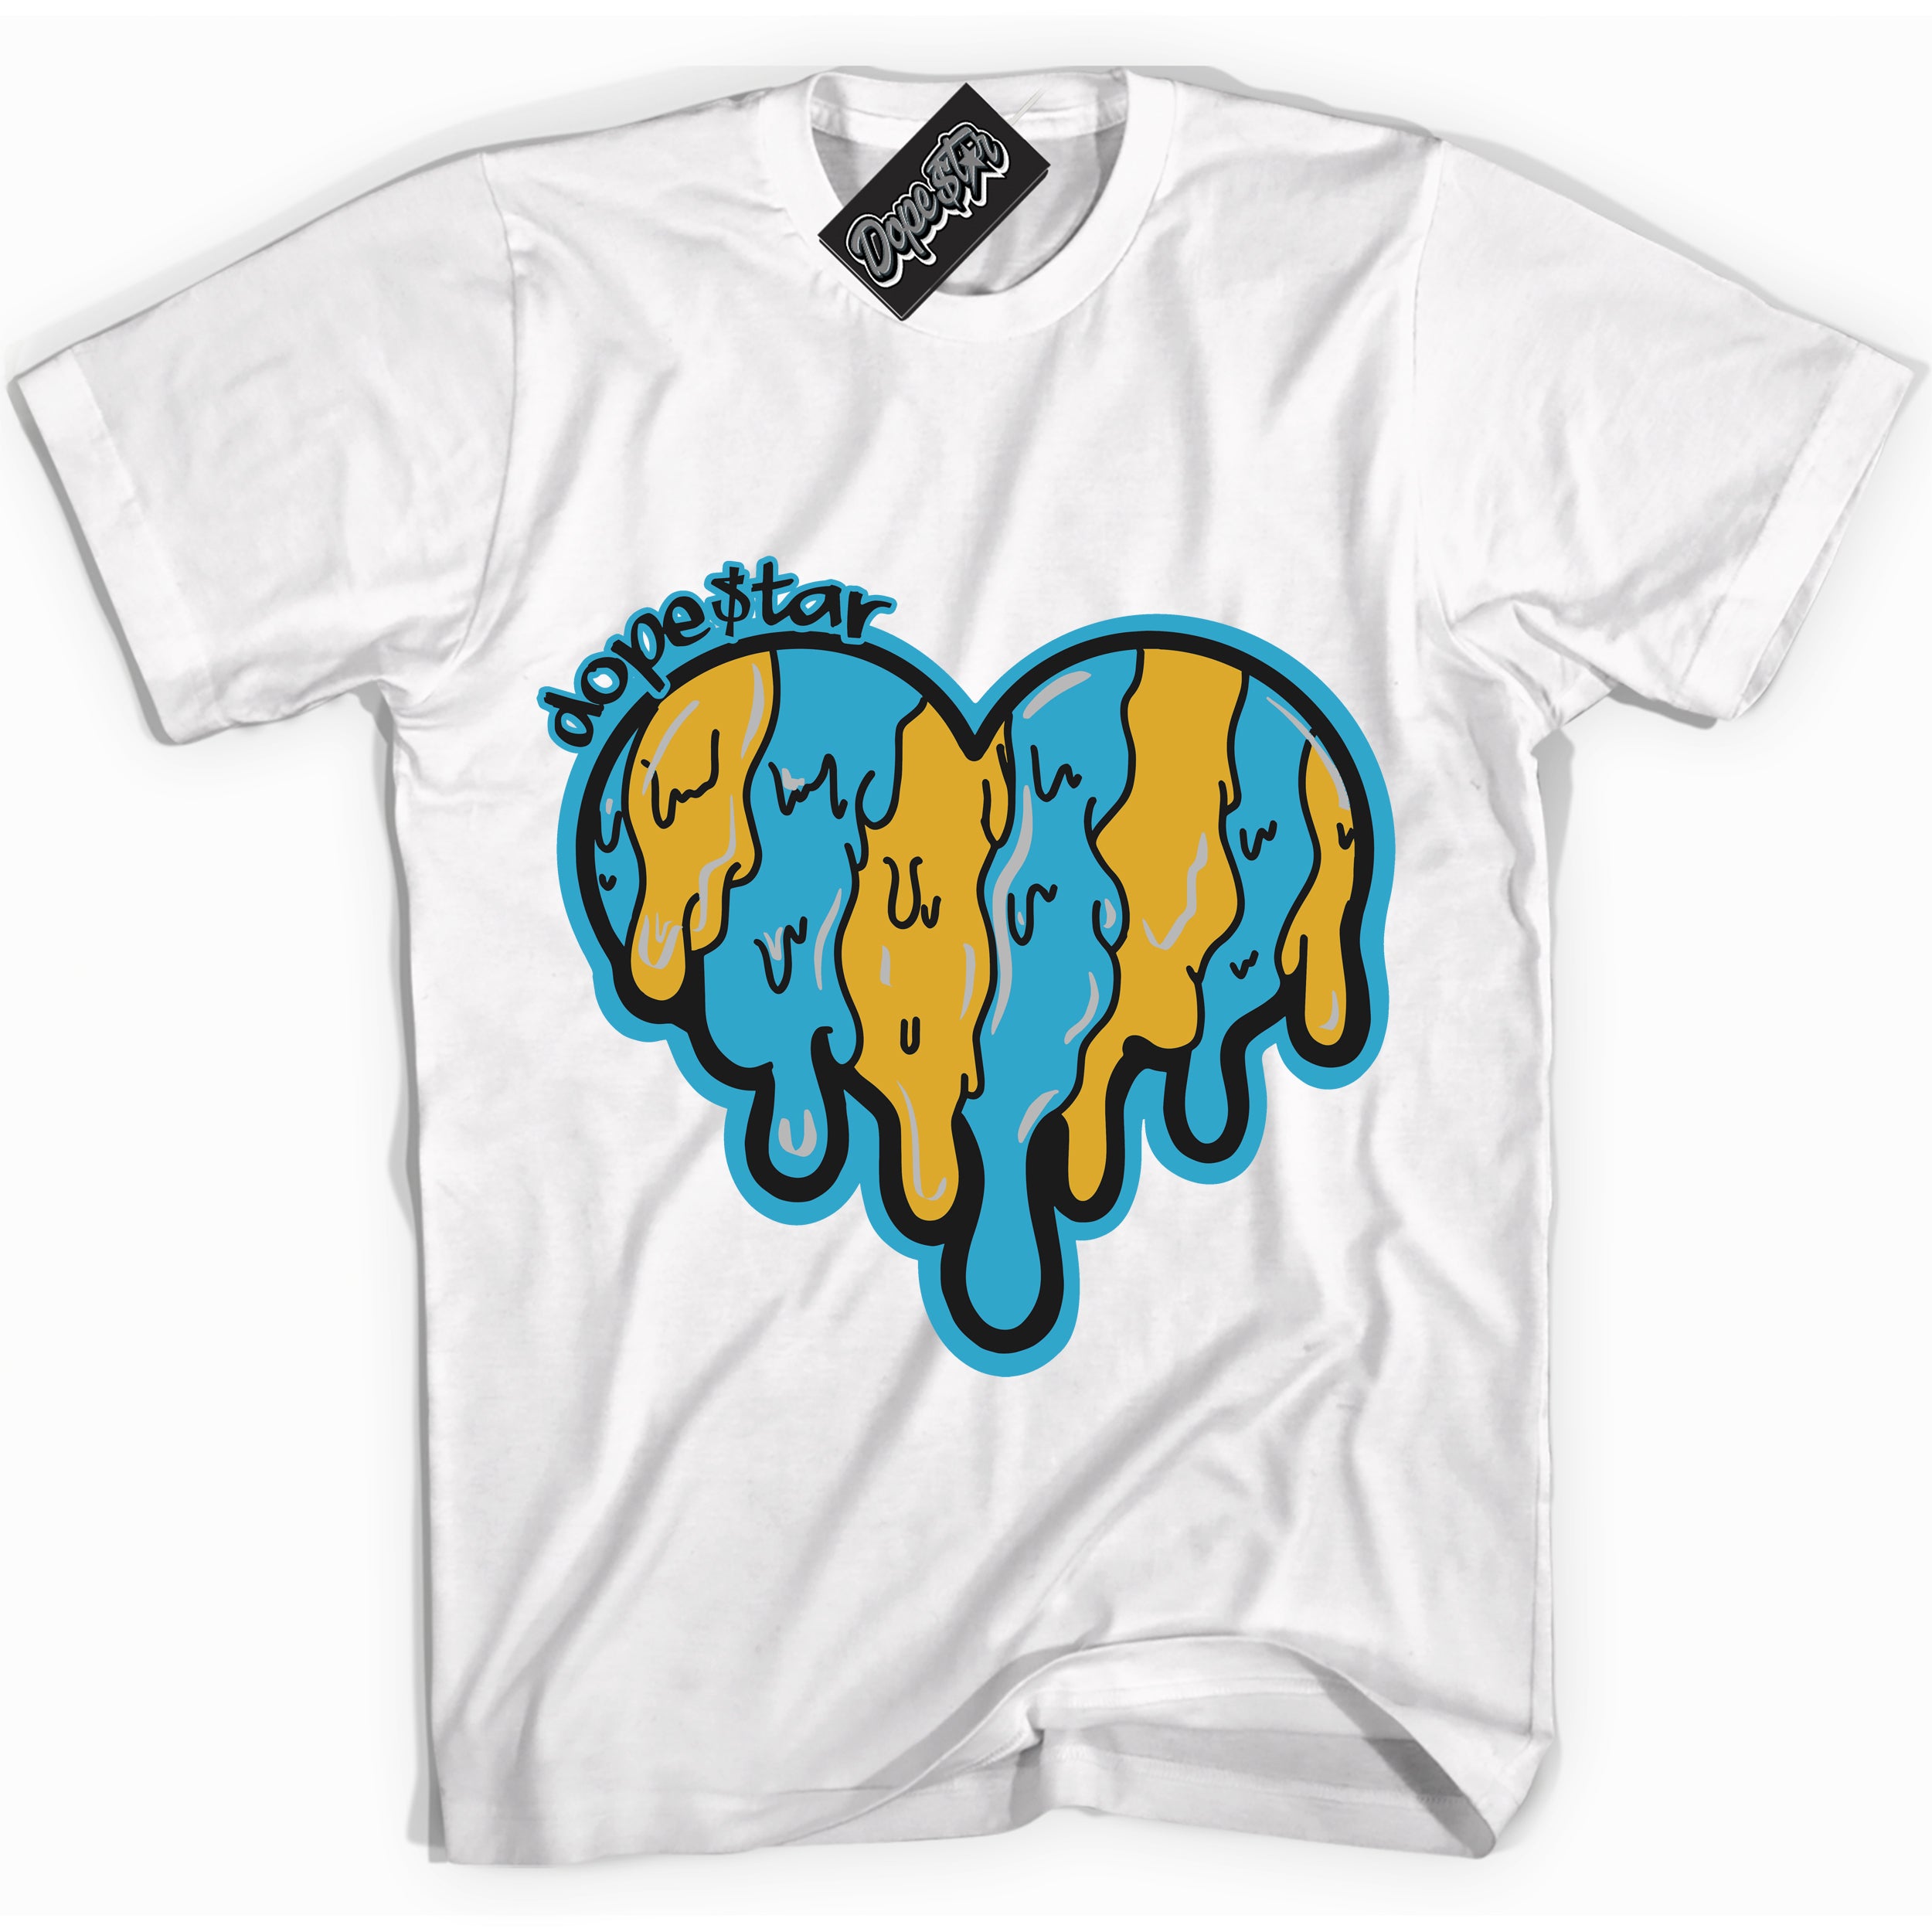 Cool White Shirt with “ Melting Heart” design that perfectly matches Aqua 5s Sneakers.